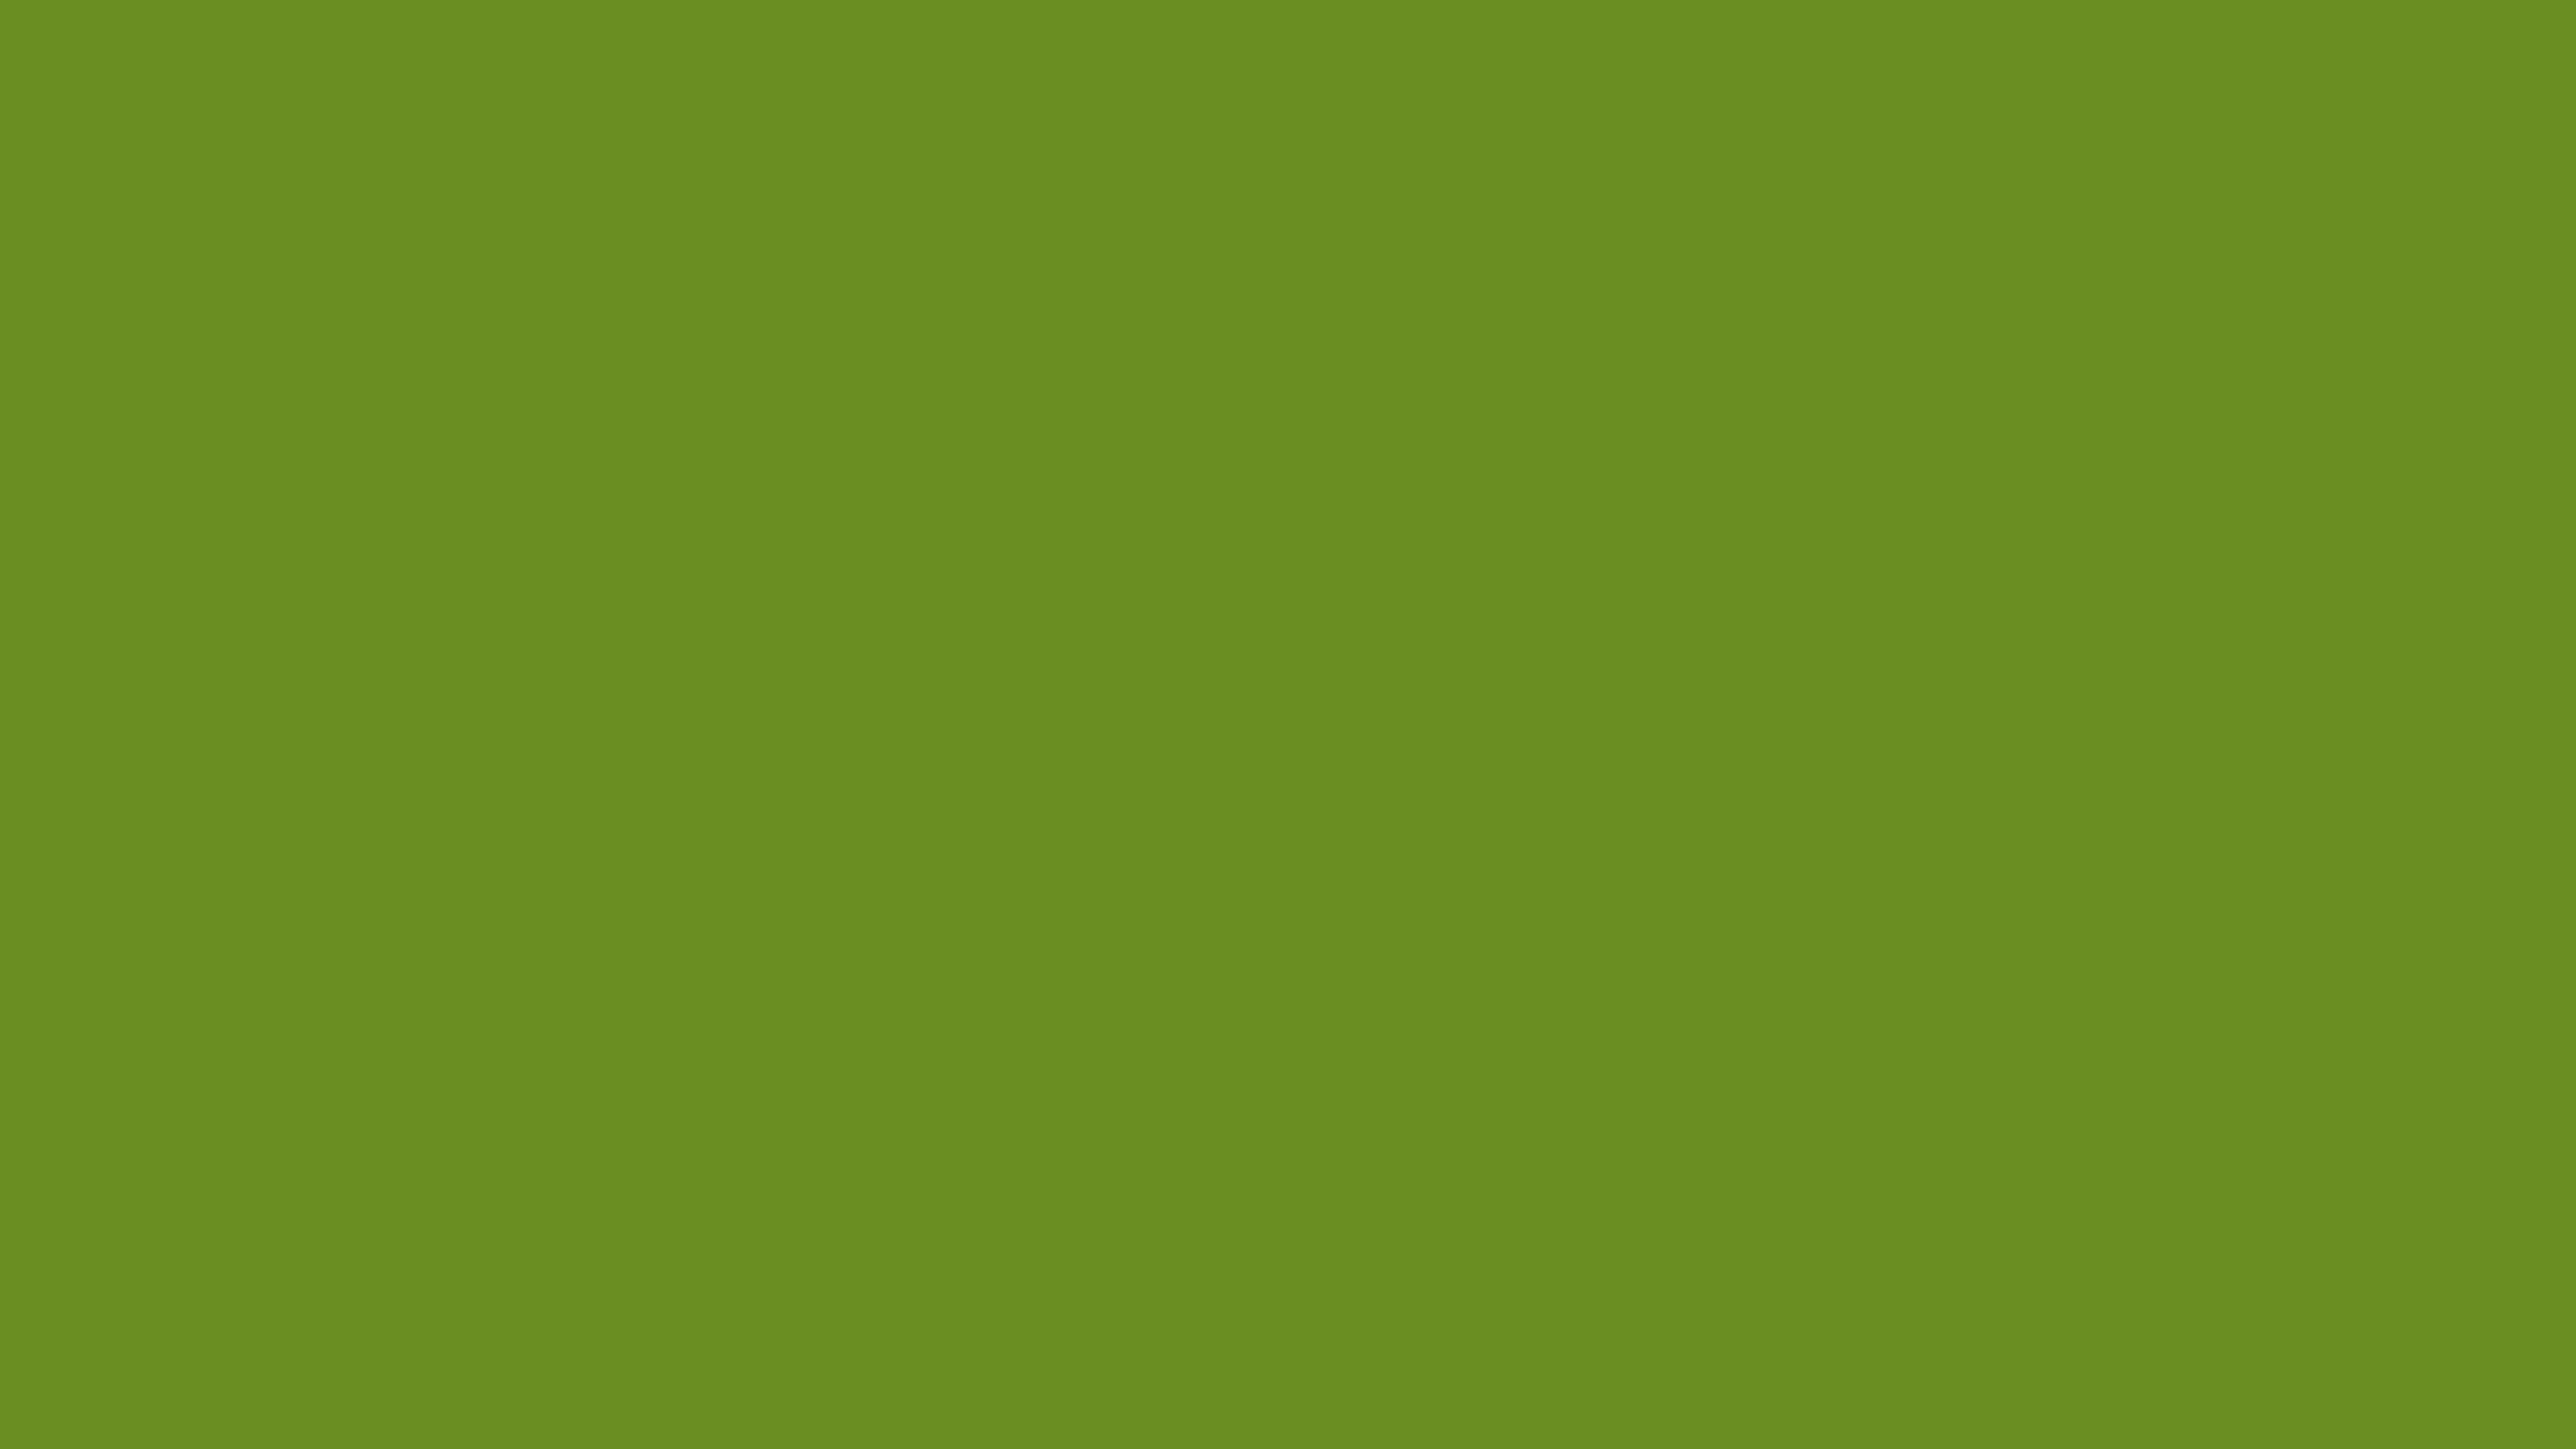 4096x2304 Olive Drab Number Three Solid Color Background